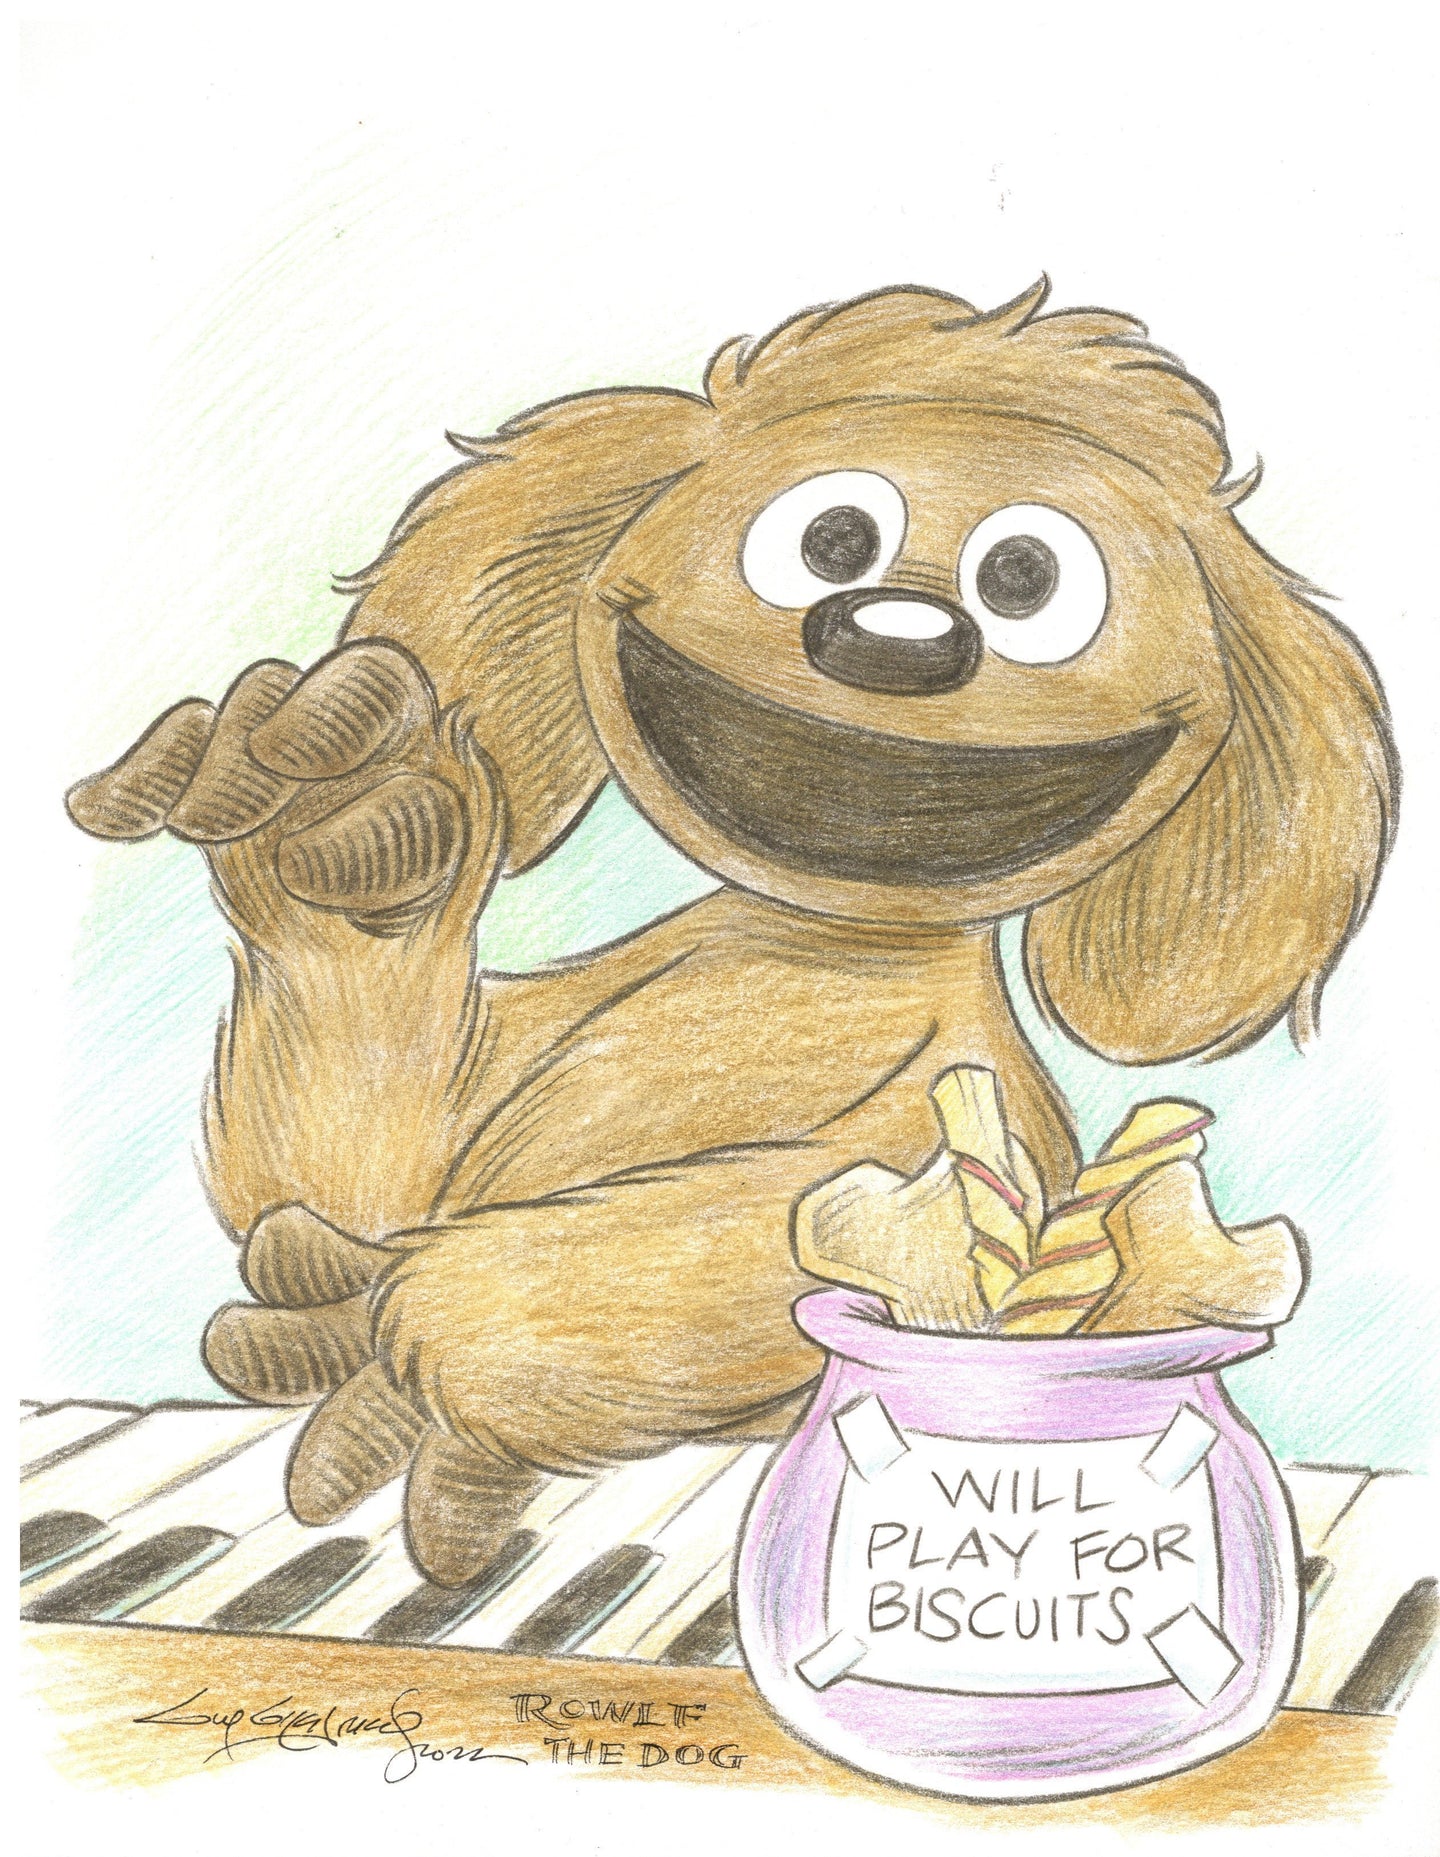 Muppets Rowlf the Dog Original Art 8.5x11 Sketch  - Created by Guy Gilchrist